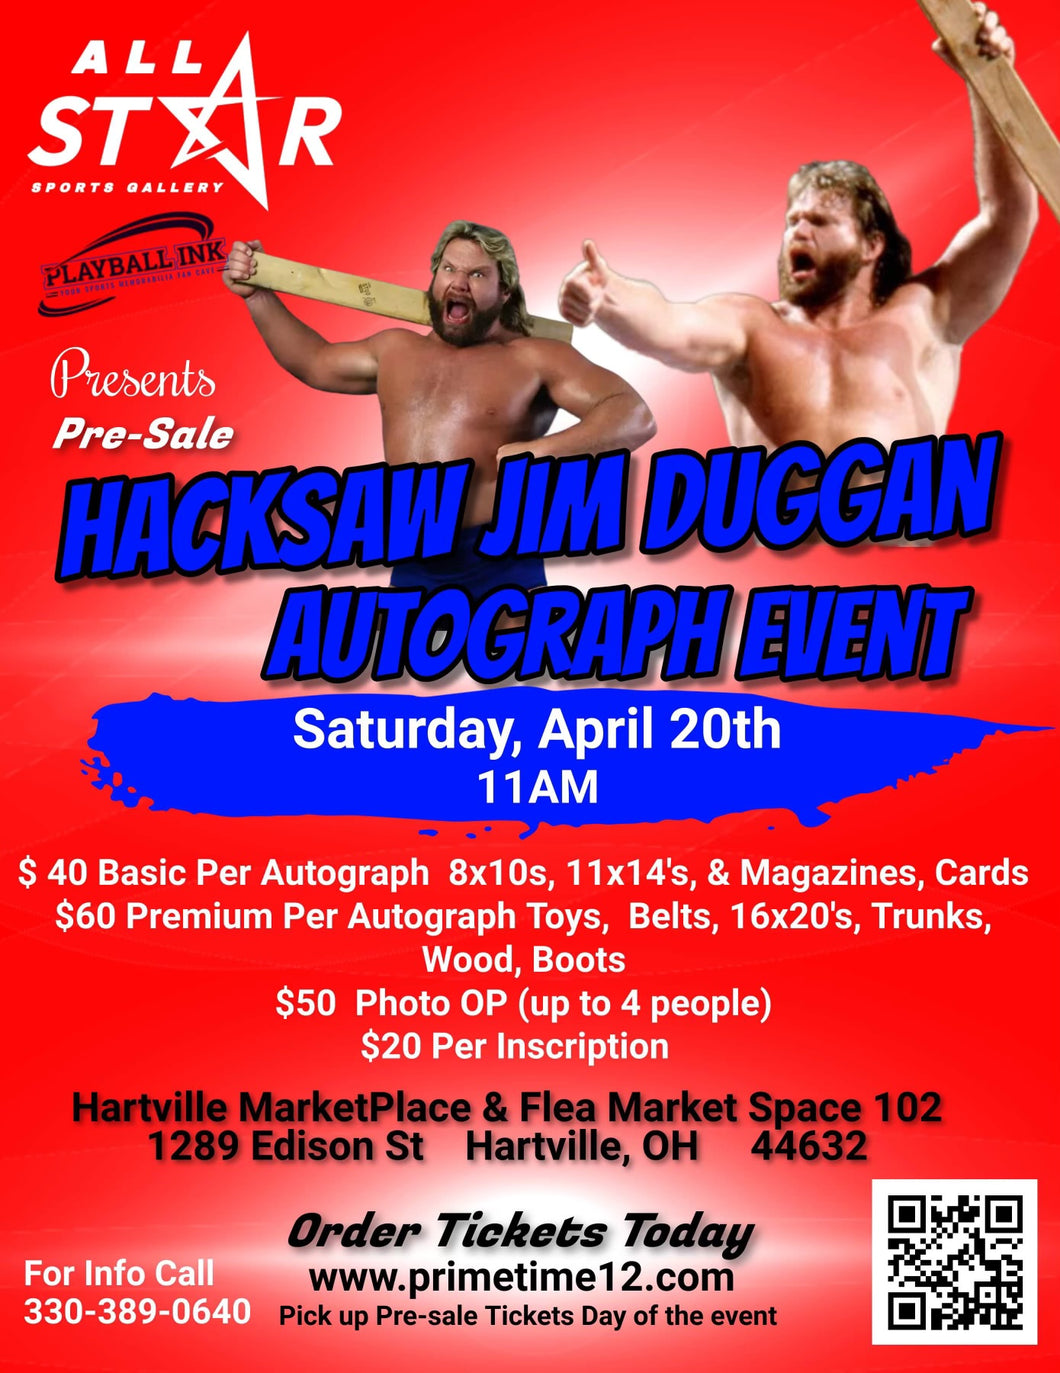 Hacksaw Jim Duggan Pre-Sale ticket for autograph signing on your 16x20 Photo, Toy, Belt, Trunks, Wood, Boot, Canvas, or Art